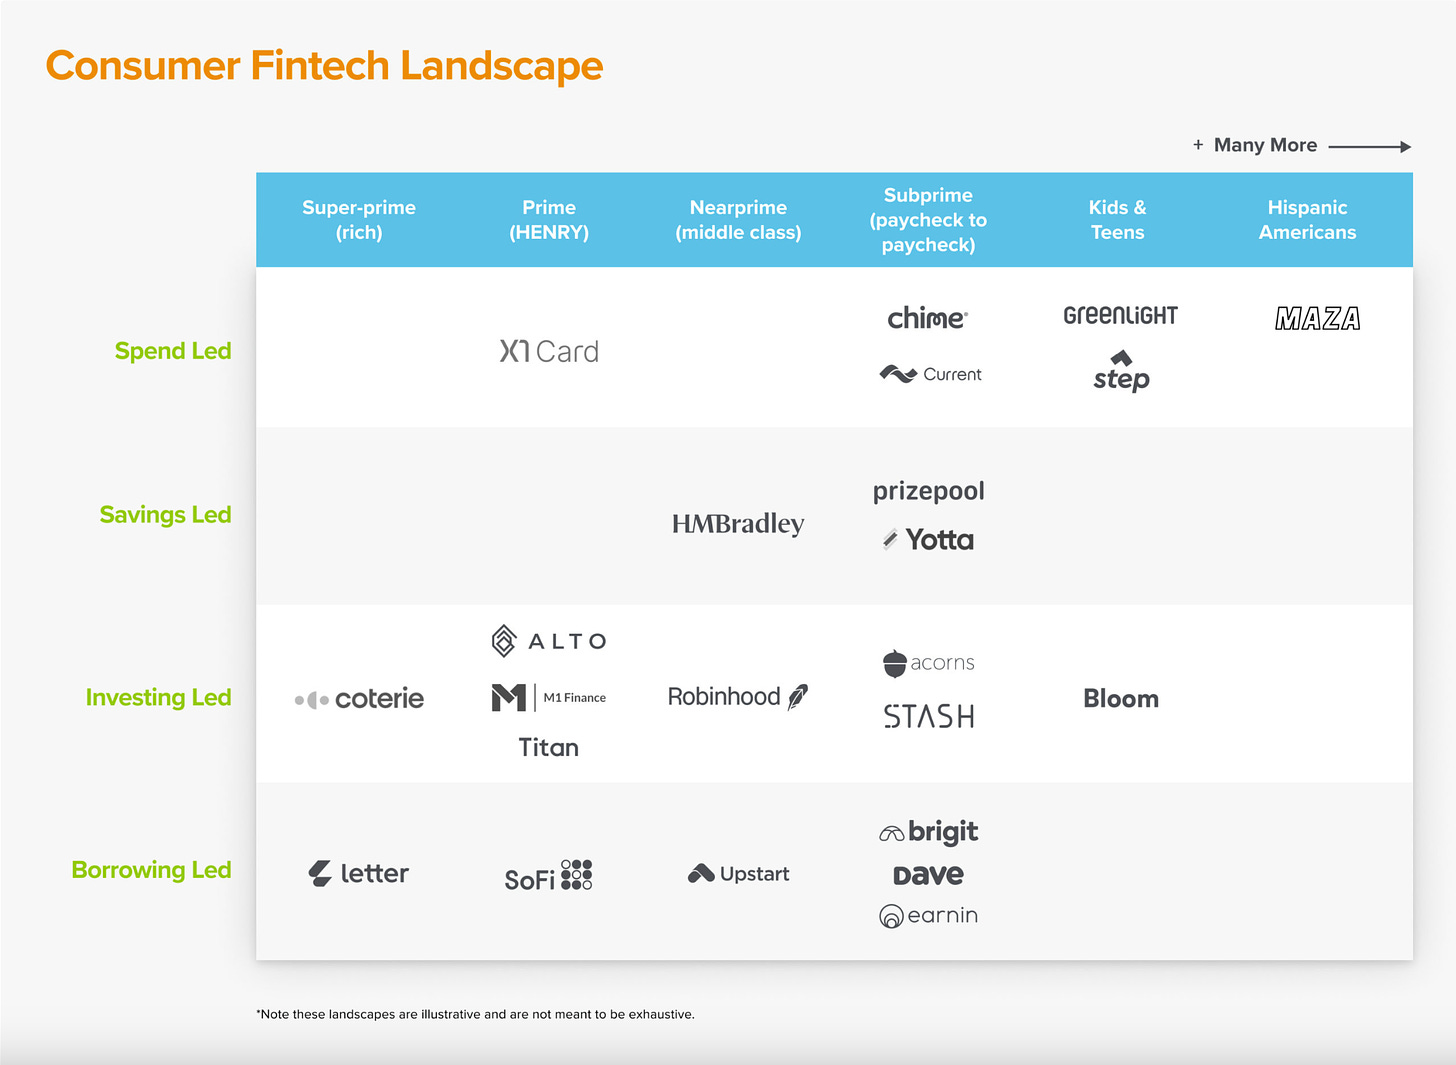 Soure: https://a16z.com/the-rise-of-many-in-consumer-fintech/